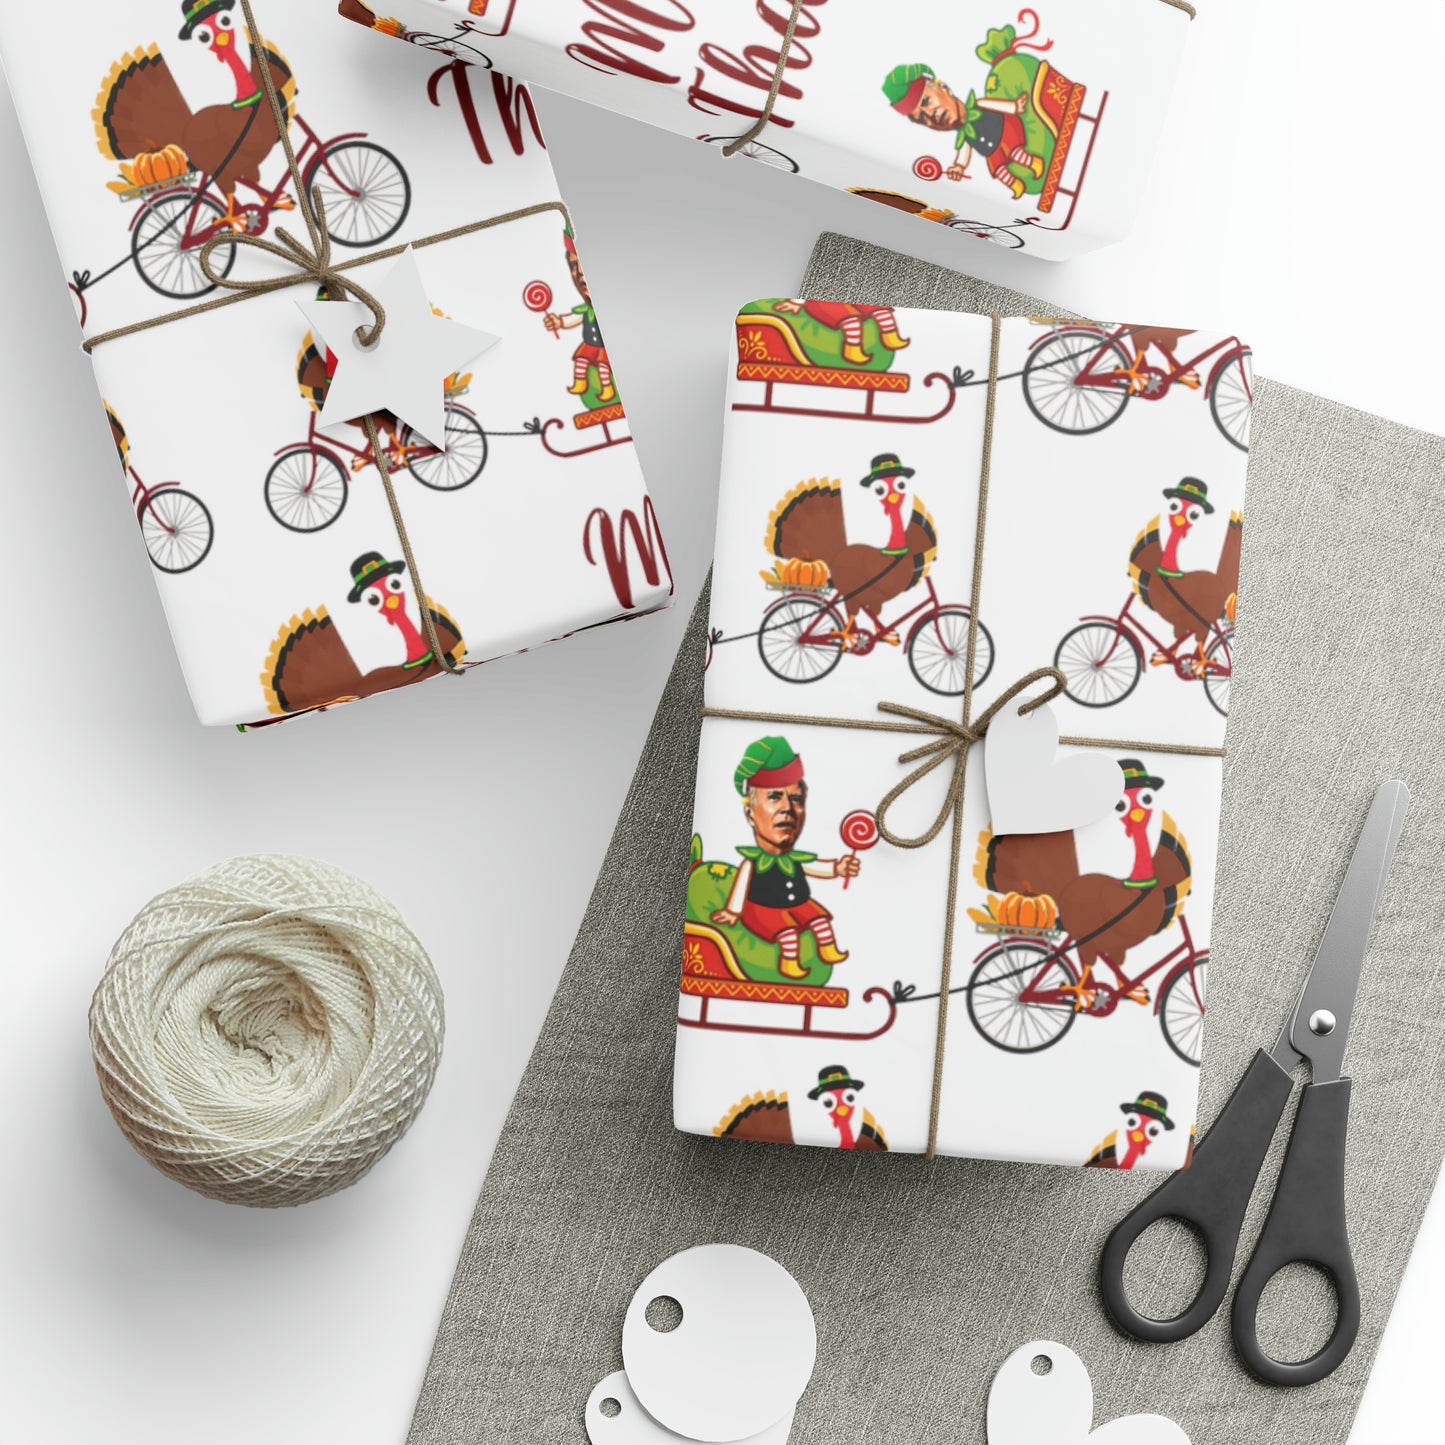 Hilarious Biden Confused Christmas Wrapping Paper for Gifts Biden Merry 4th of Thanksgiving